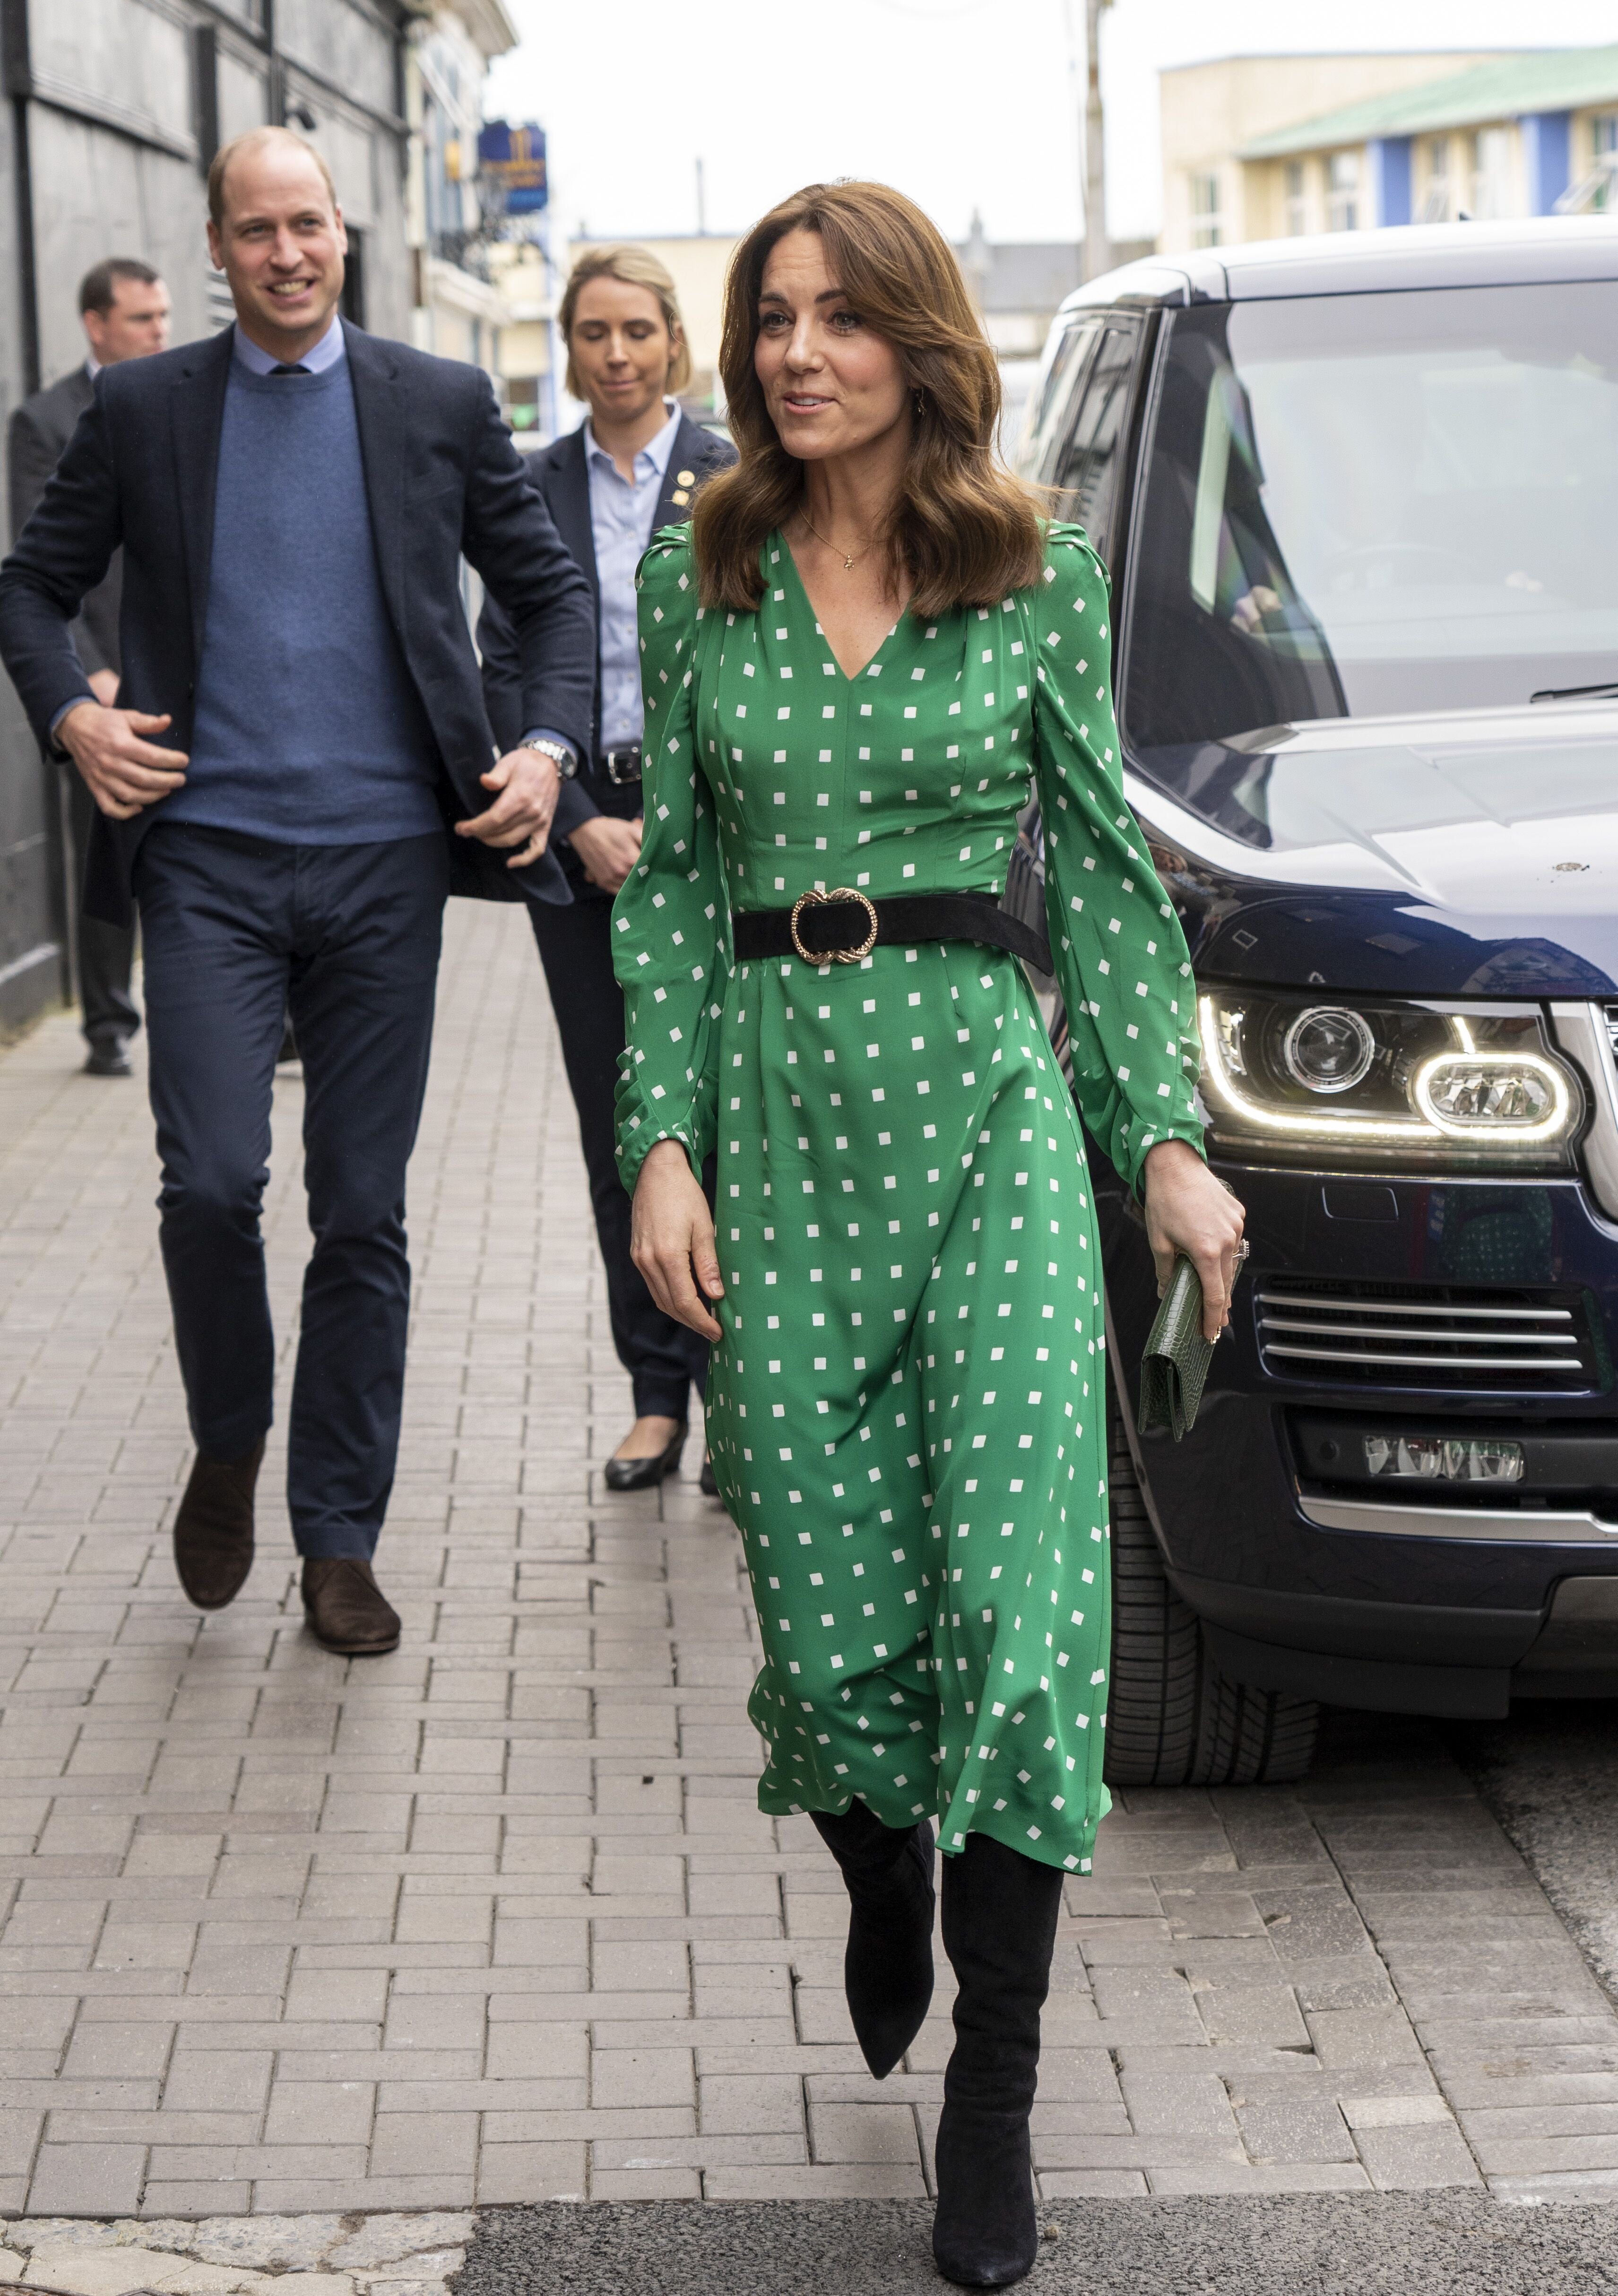 Prince William and Duchess Kate arrive to visit a family-owned, traditional Irish pub in Galway city center on March 5, 2020, in Ireland | Photo: Arthur Edwards/WPA Pool/Getty Images